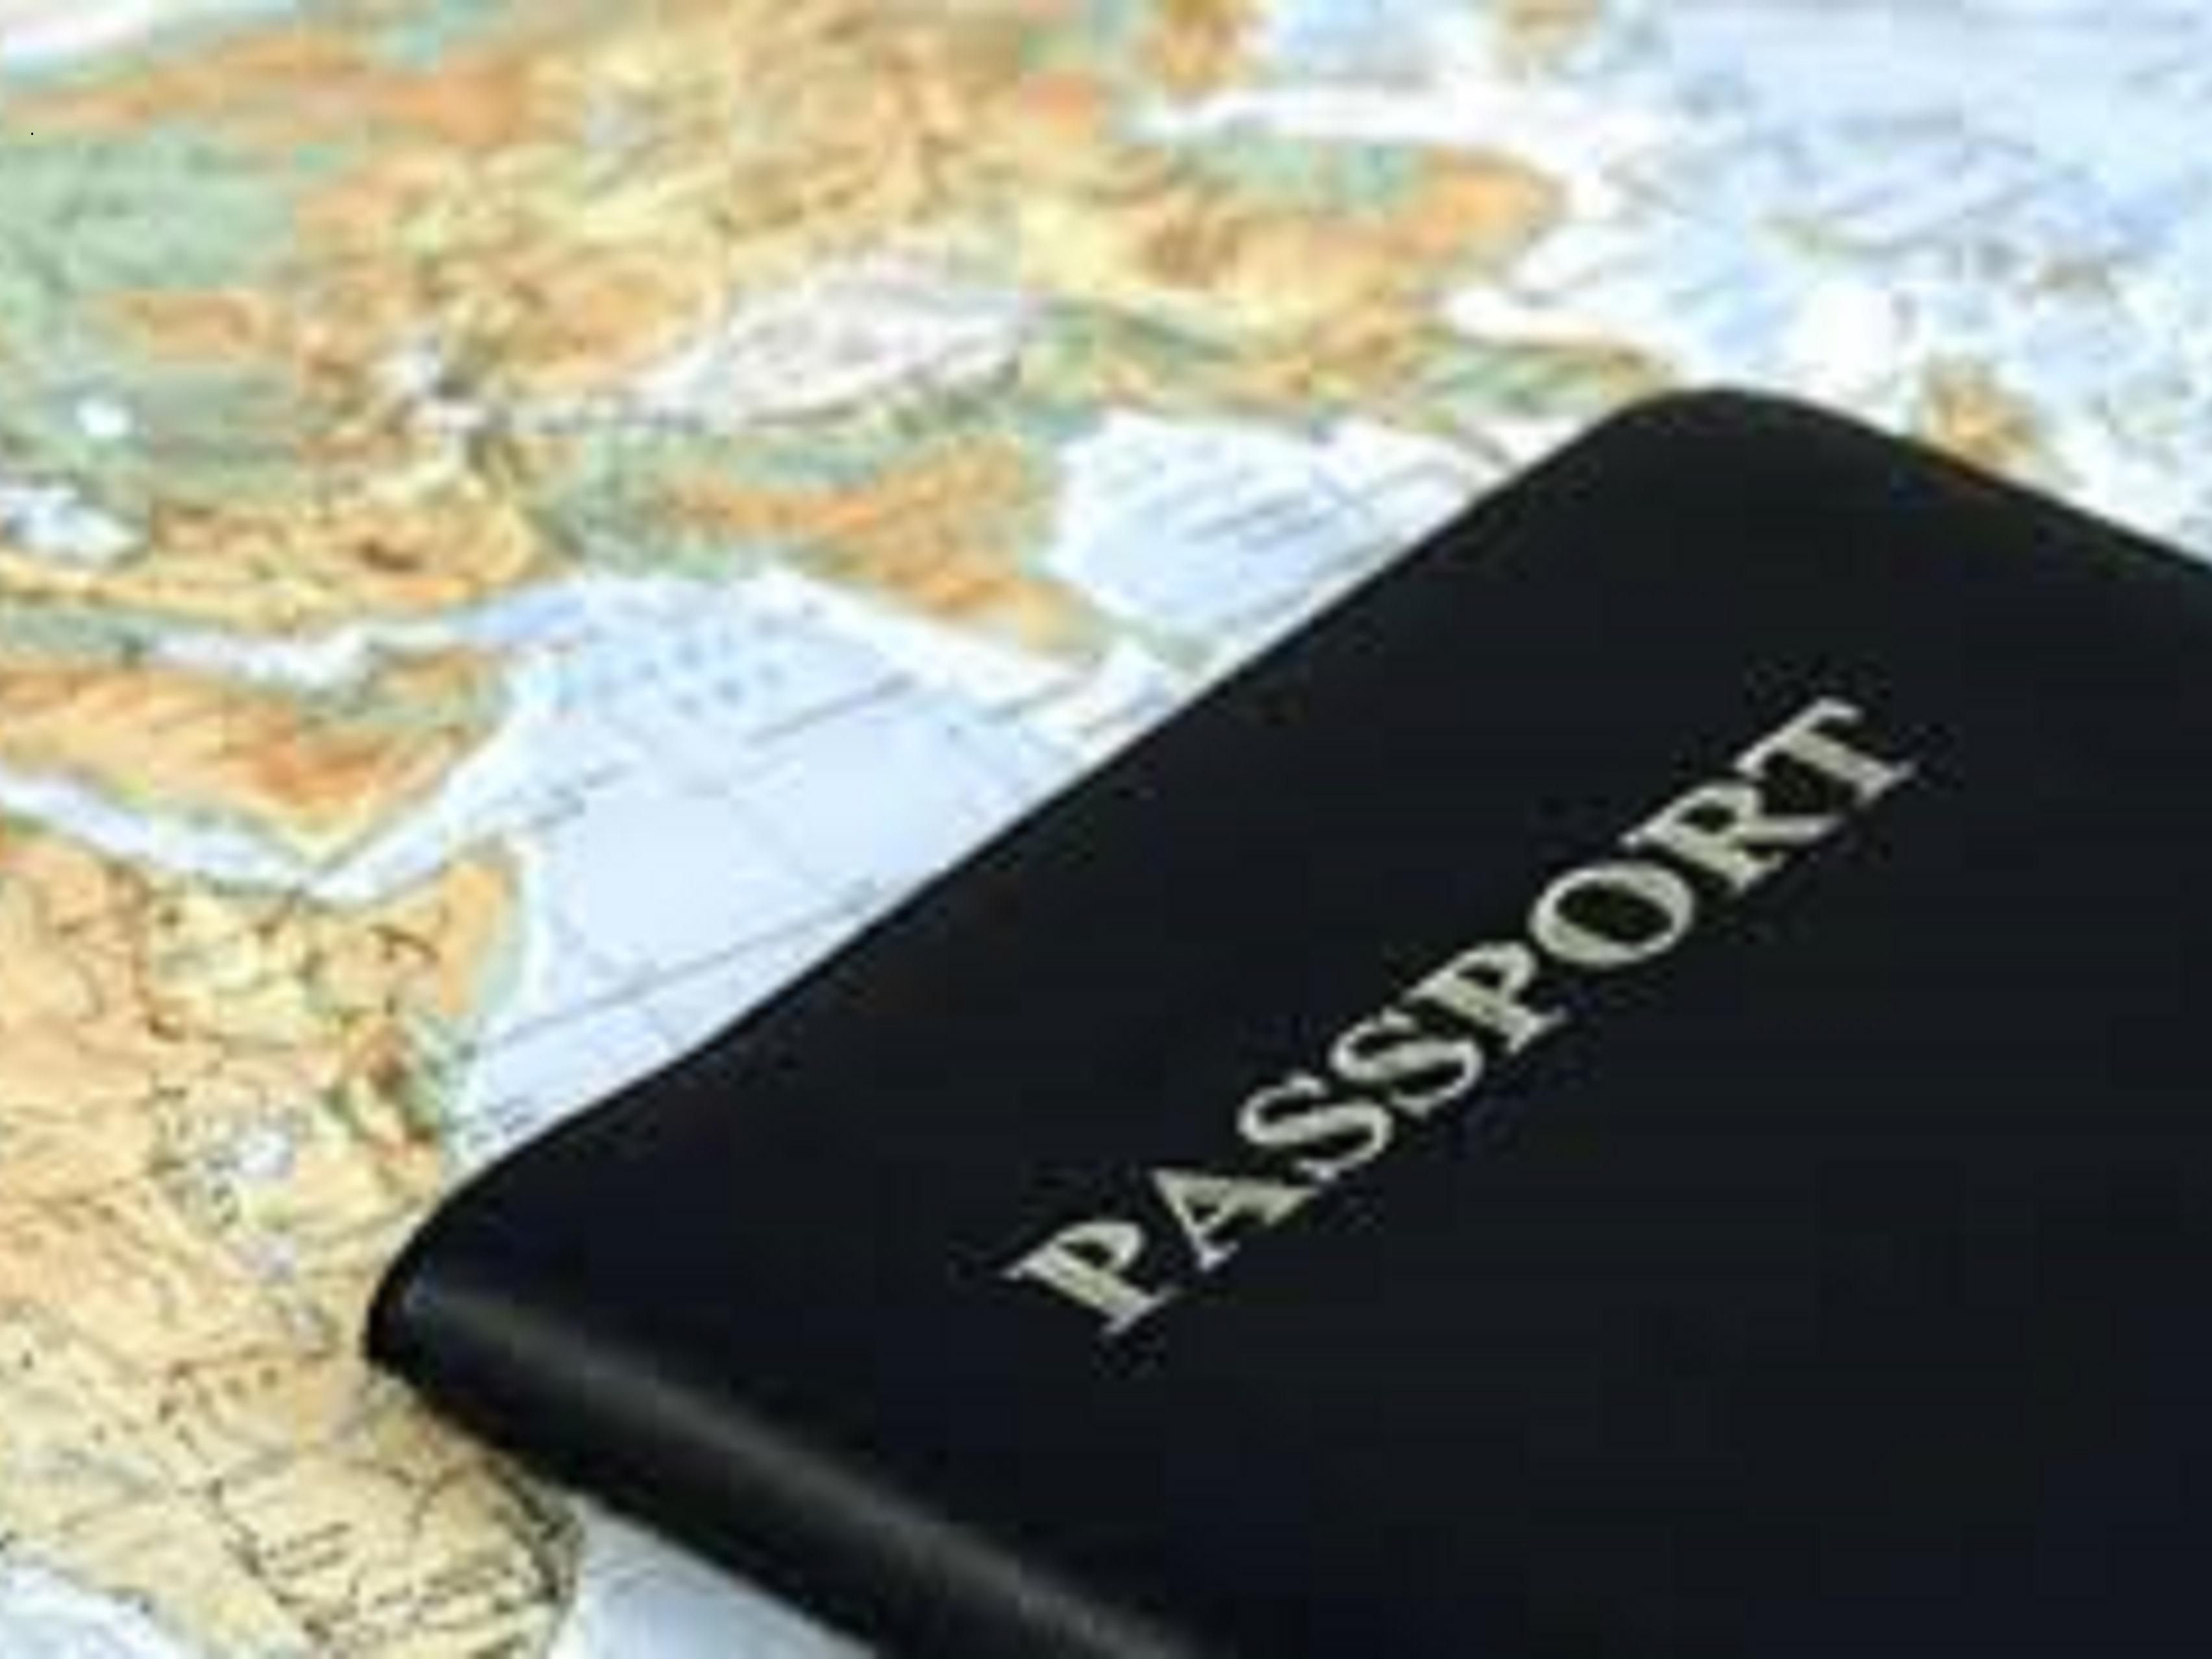 Need to get your Passport?